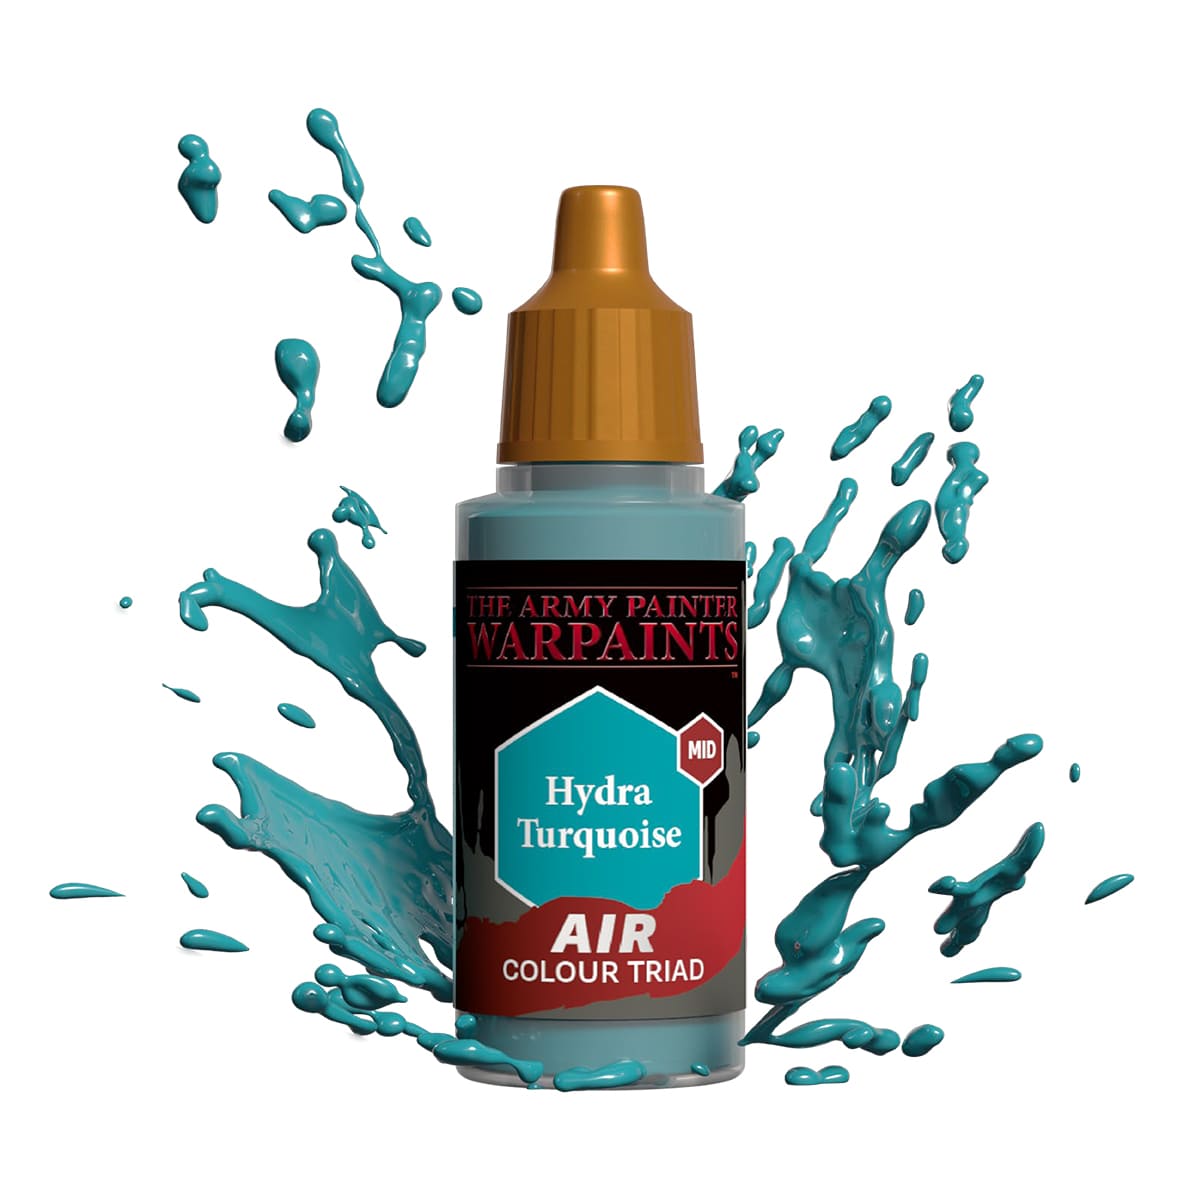 Army Painter Paint: Air Hydra Turquoise